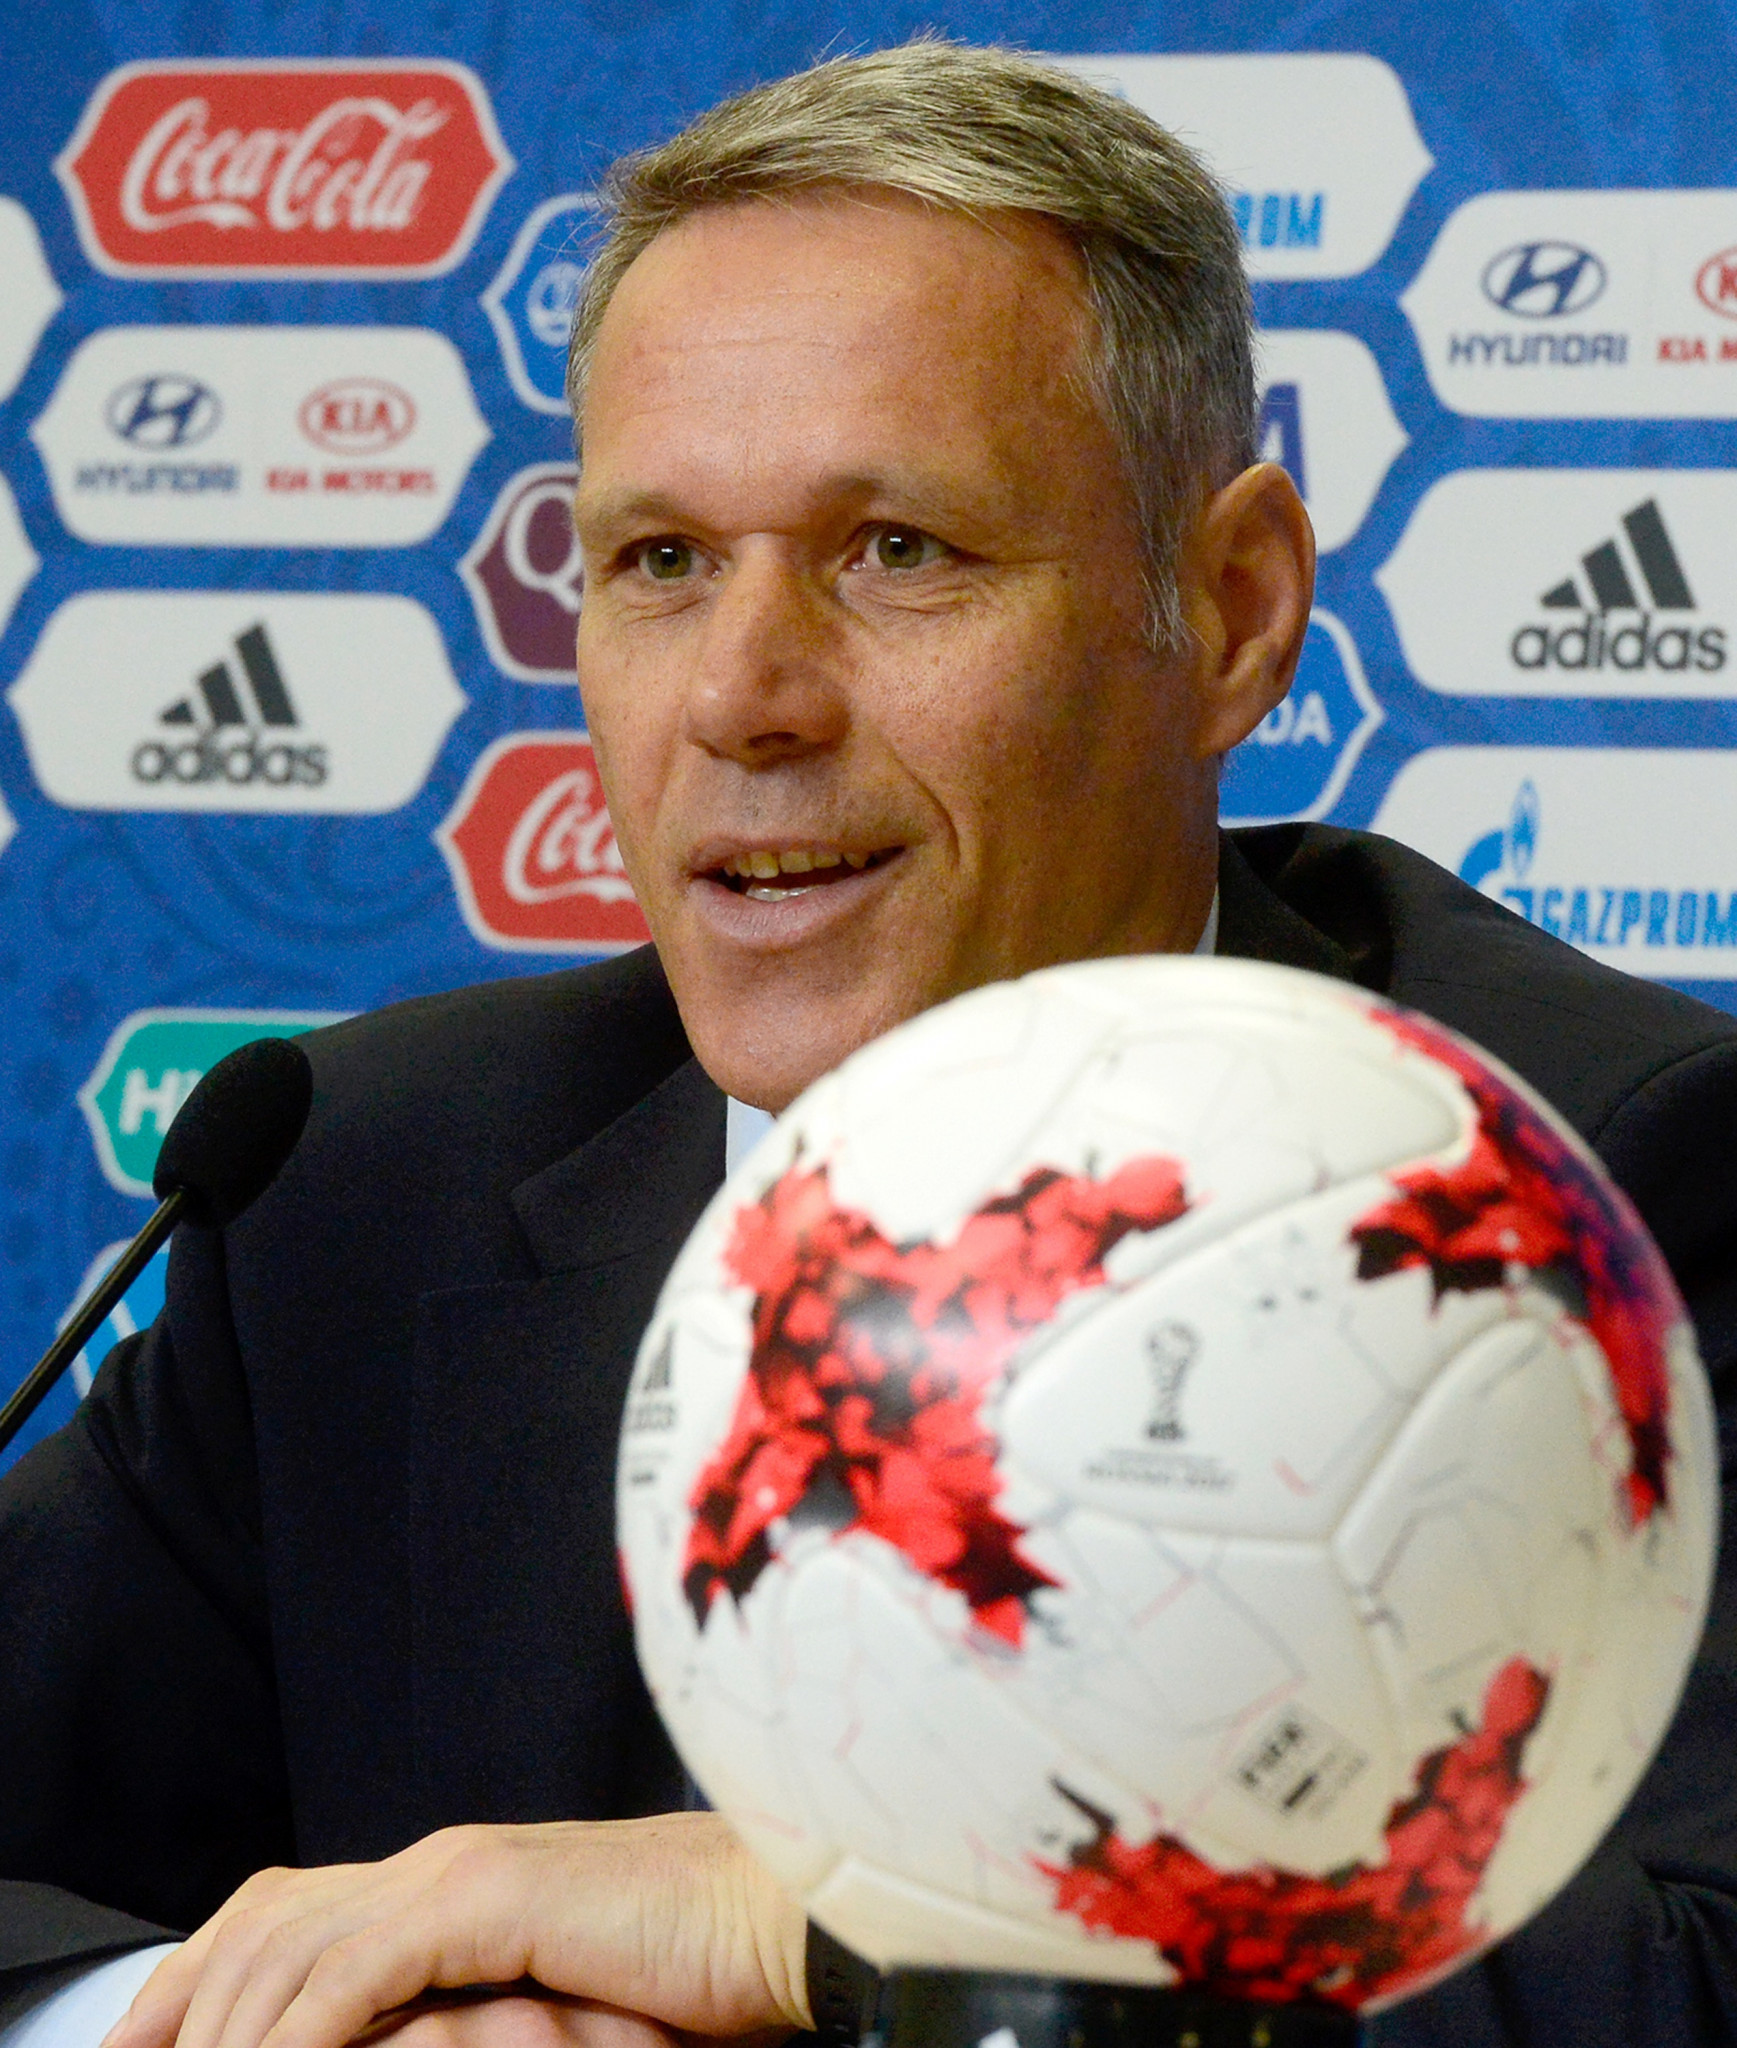 Van Basten to leave as FIFA's chief technical development officer